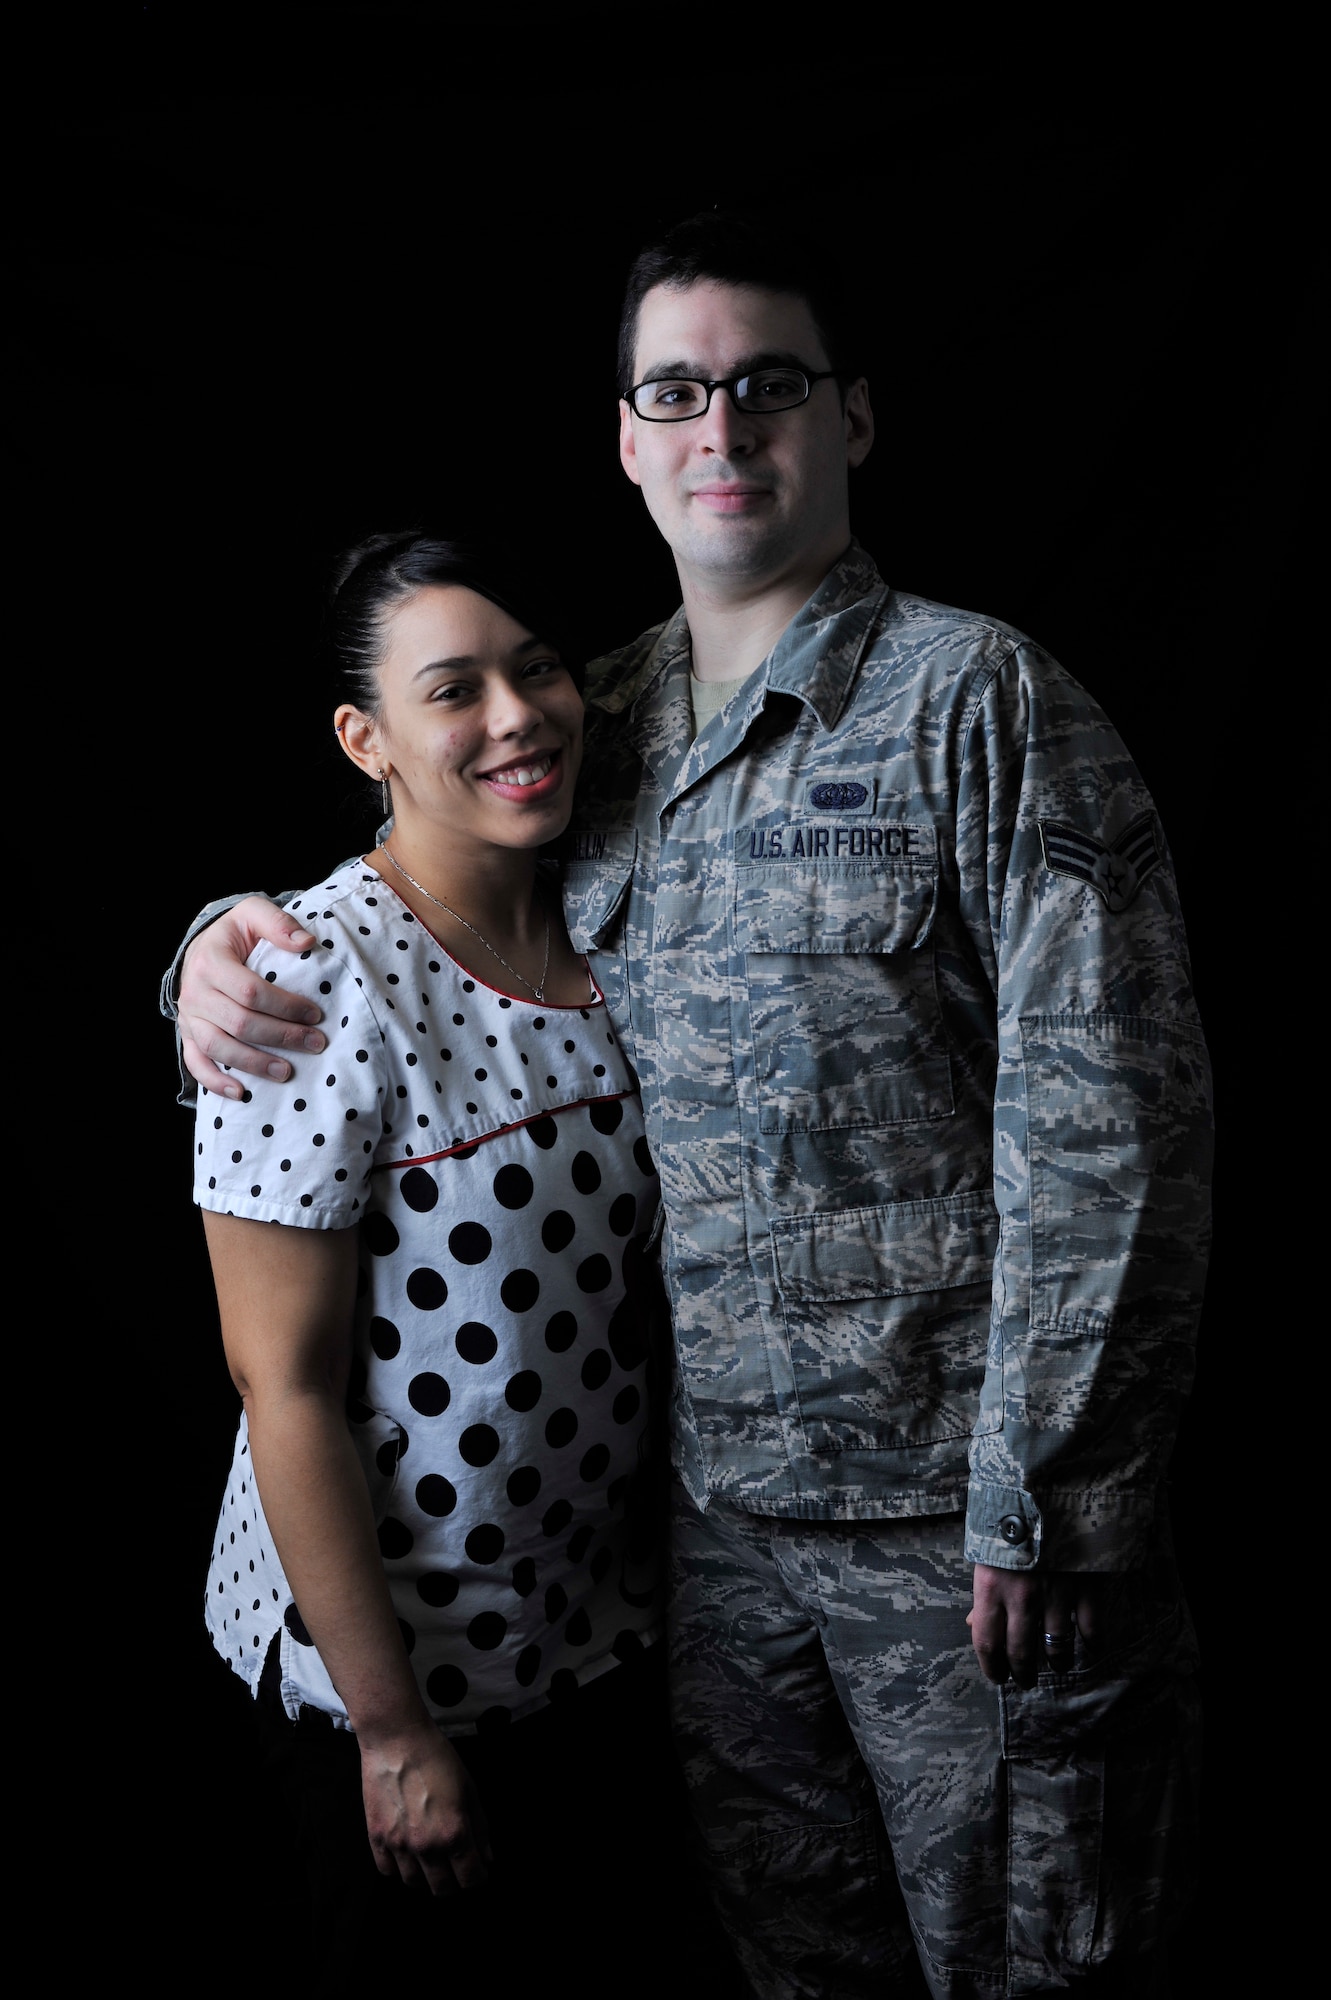 Sasha Southee-Mallin, left, 48th Medical Support Squadron laboratory technician, and U.S. Air Force Senior Airman Matthew Mallin, 100th Communication Squadron wing cyber security technician, pose for a photo Feb. 11, 2016 on RAF Mildenhall, England. The couple provided lifesaving medical care until emergency responders arrived to a heart-attack victim Jan. 17, 2016, while on vacation in Norway. (U.S. Air Force photo by Staff Sgt. Micaiah Anthony/Released)